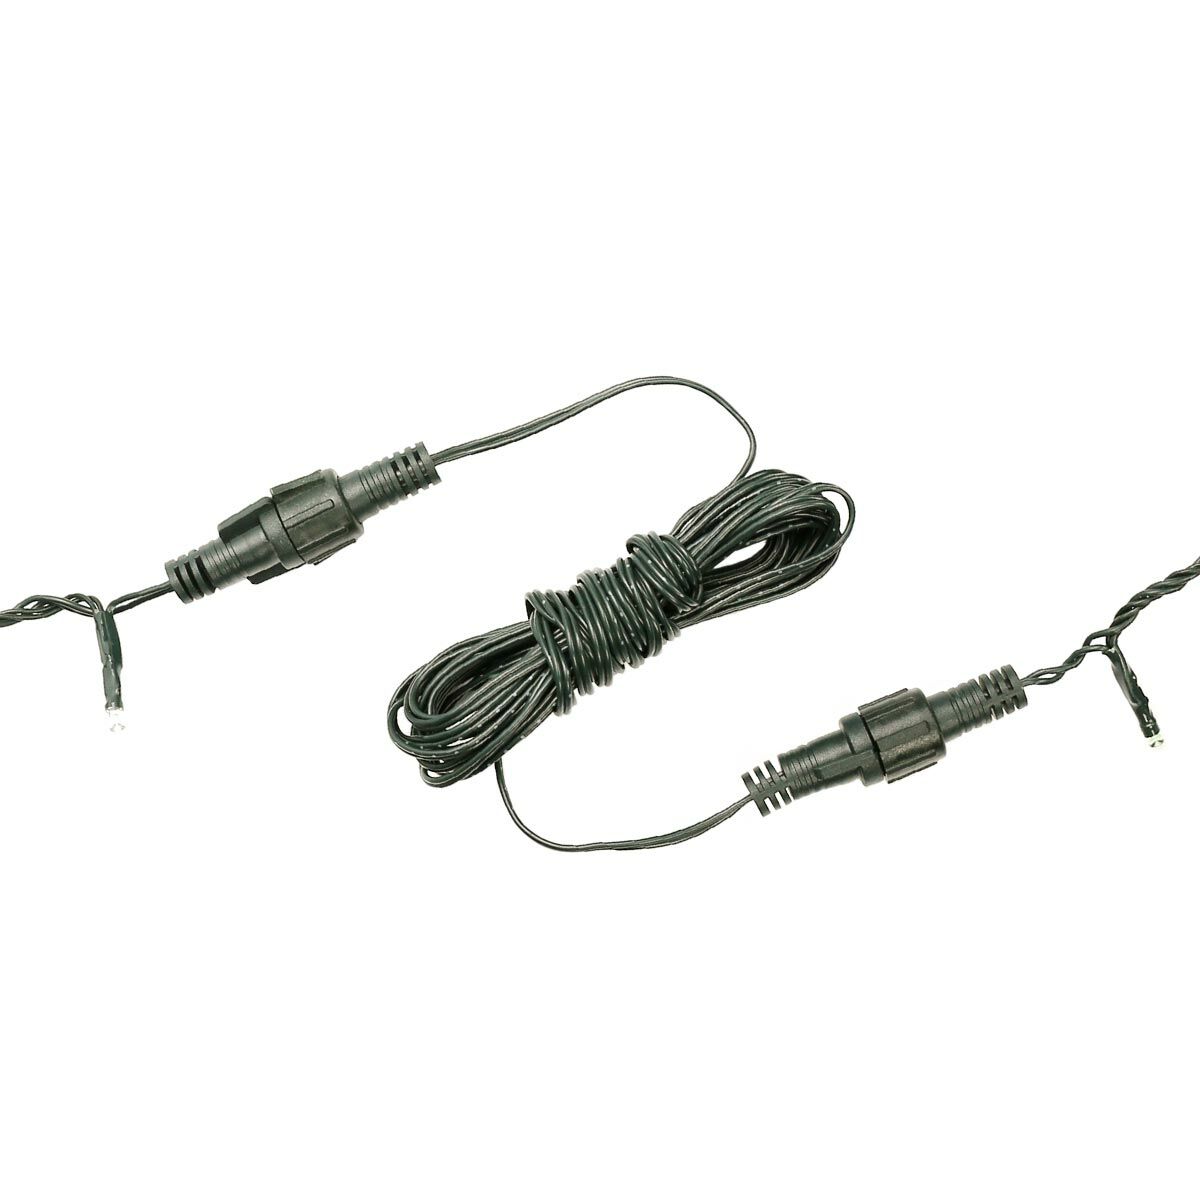 ConnectGo® 5m Extension, Green Cable image 3